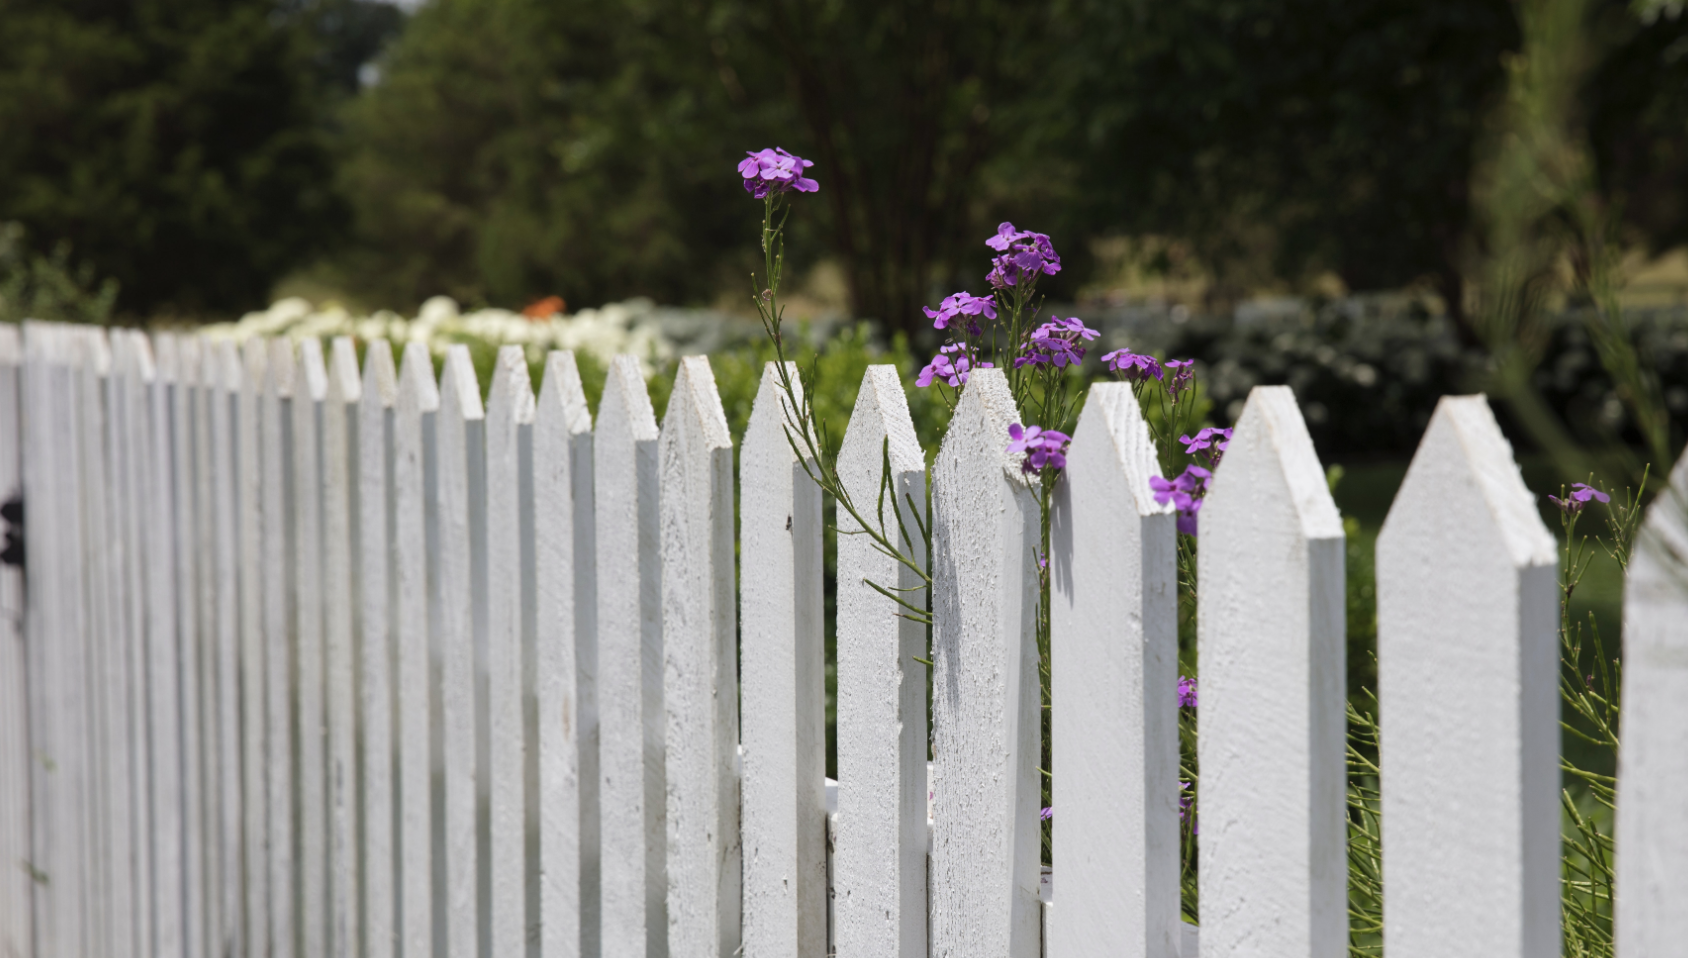 Buy Sell Love Durham, blog image, fence with purple flowers